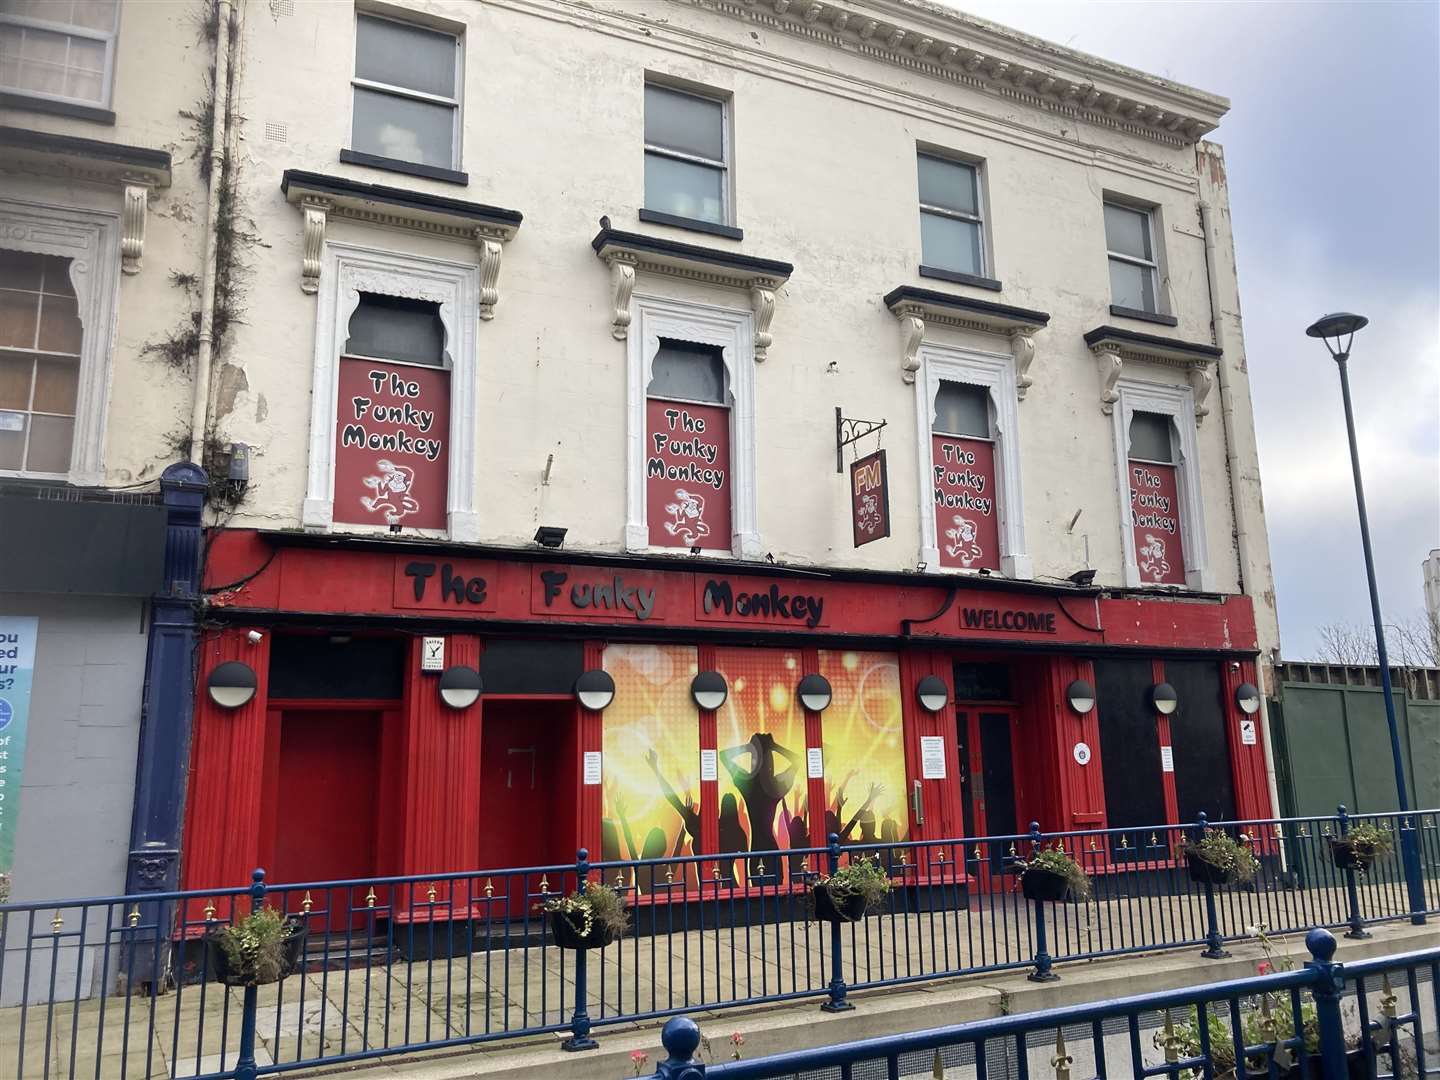 The Funky Monkey nightclub is now closed and is part of the plans to regenerate the area